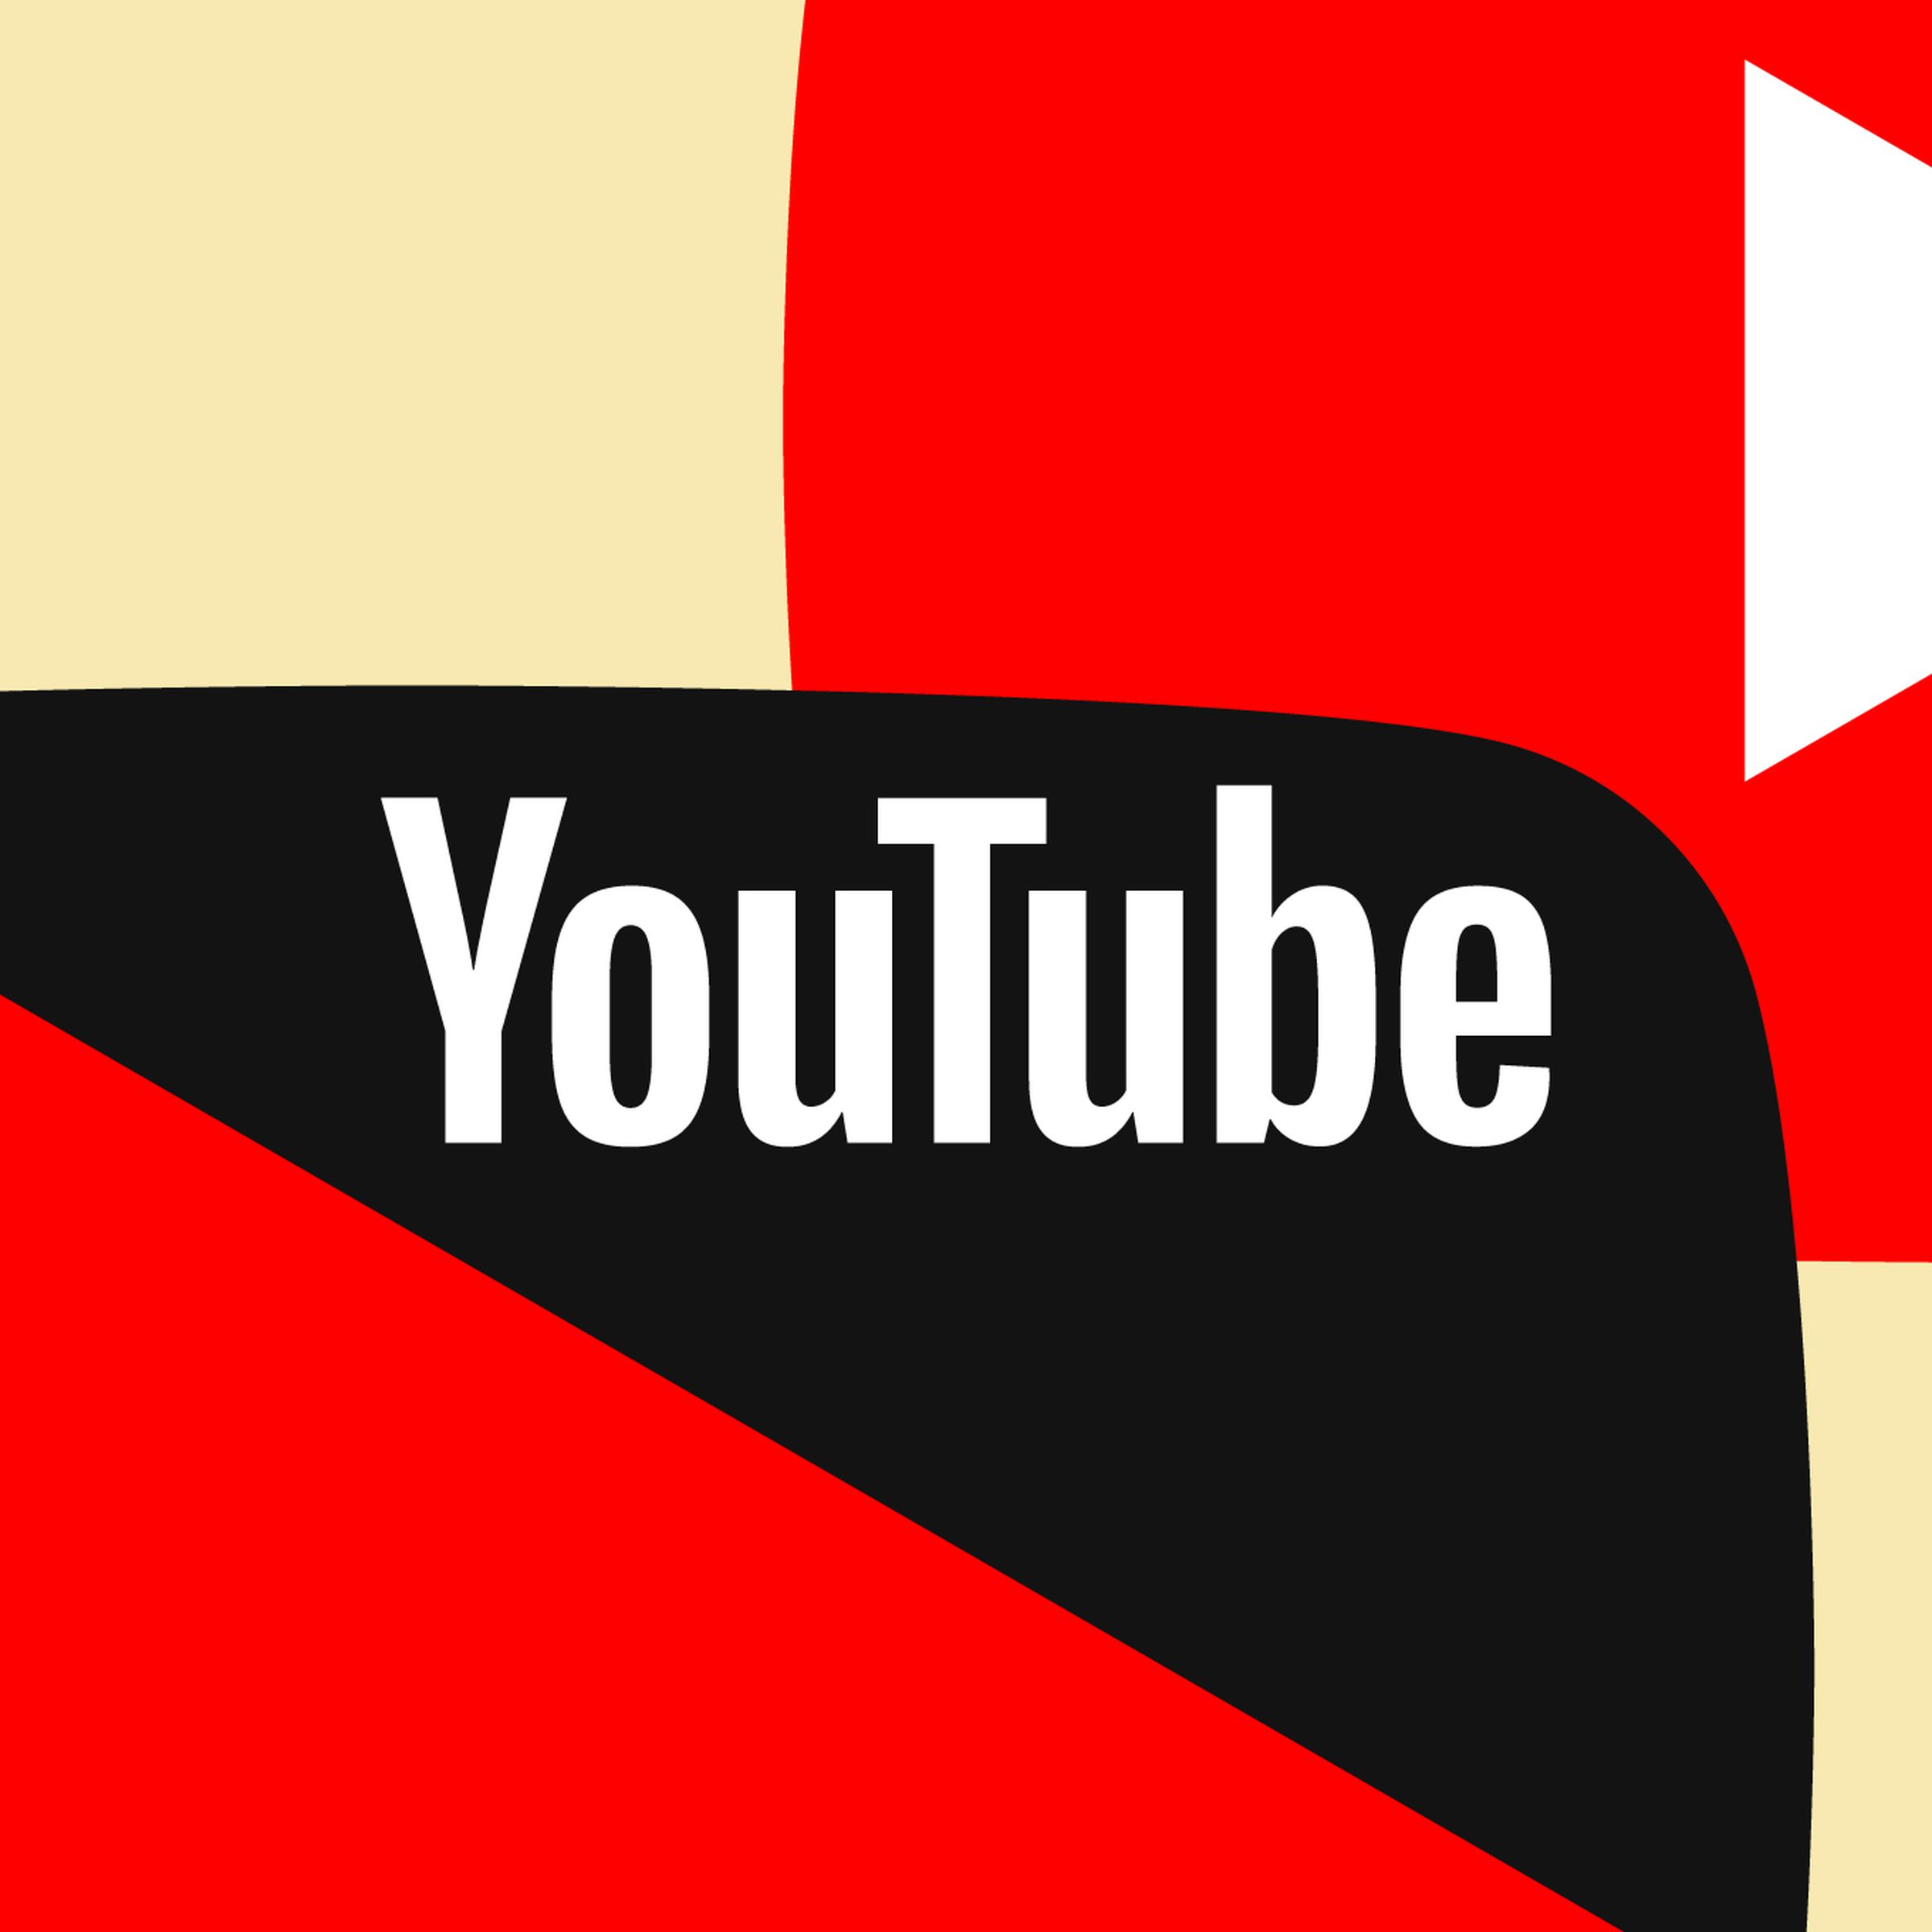 YouTube logo on an abstract background